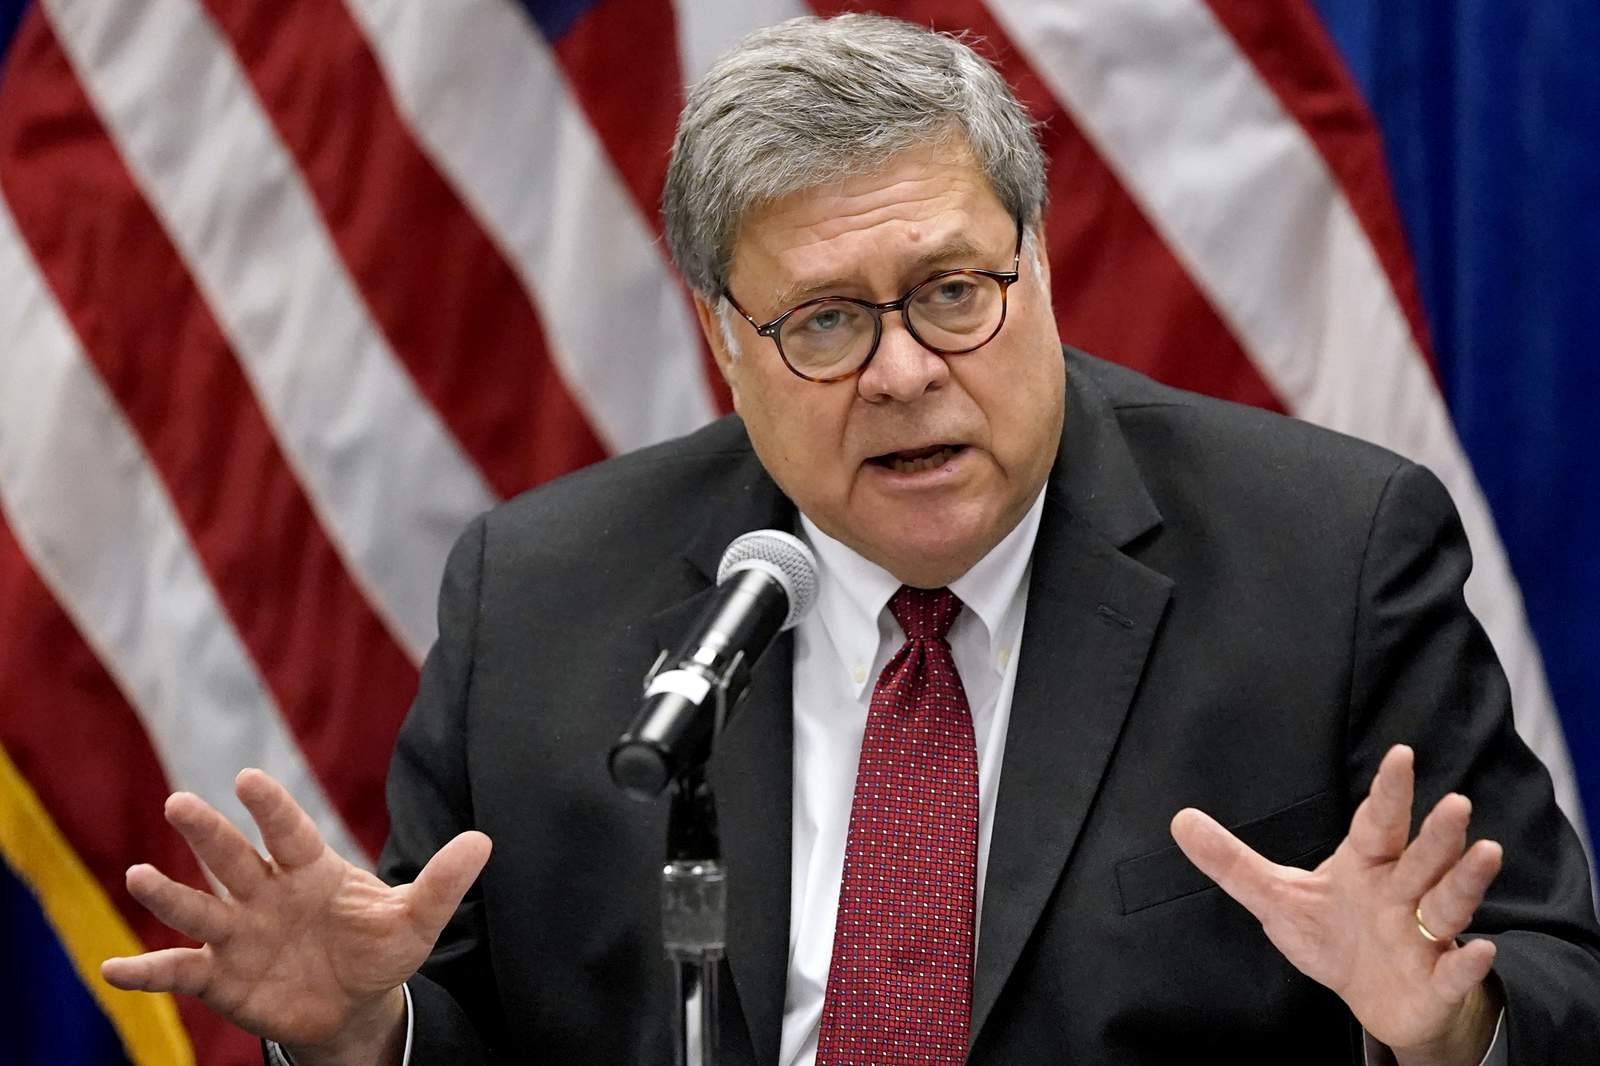 President Trump says Attorney General William Barr resigning, will leave before Christmas